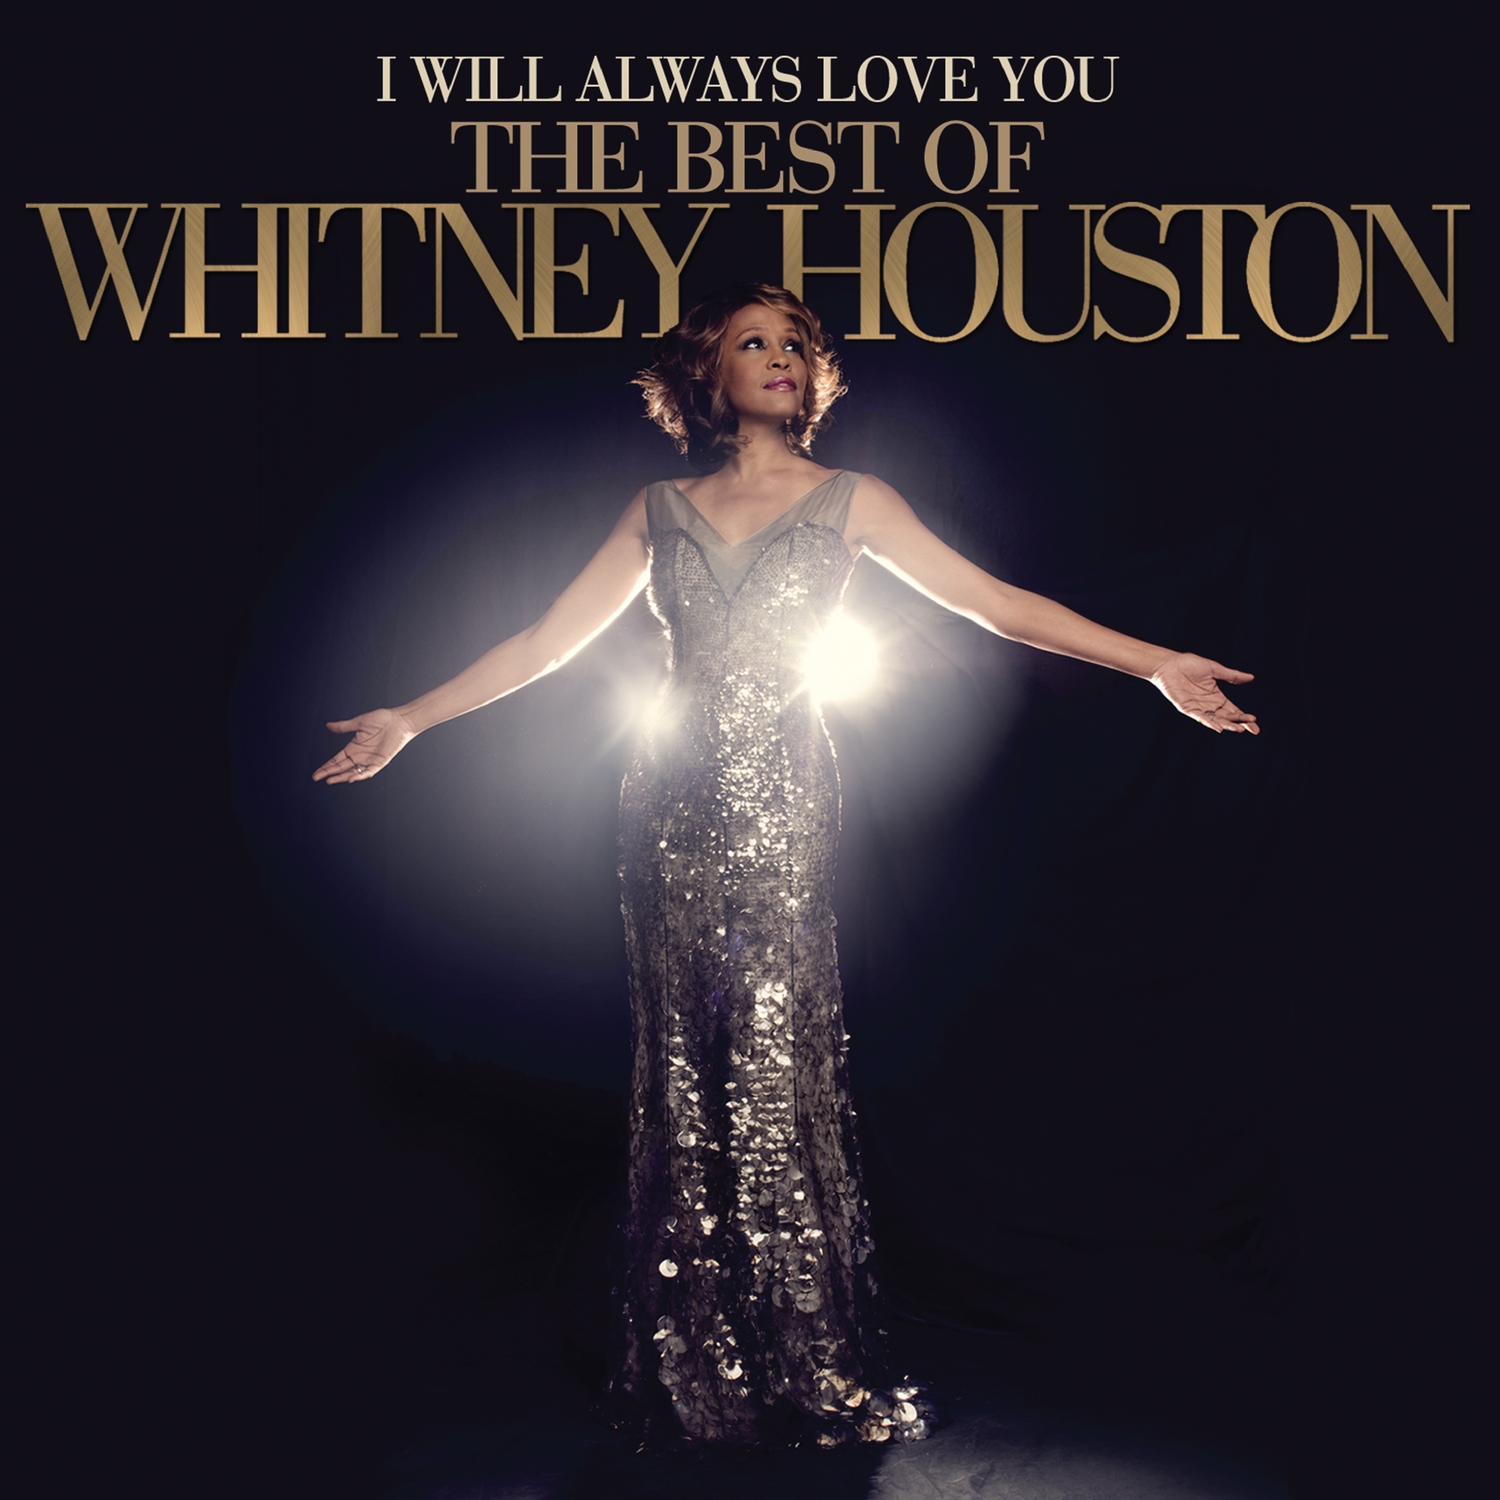 I WILL ALWAYS LOVE YOU: THE BEST OF WHIT